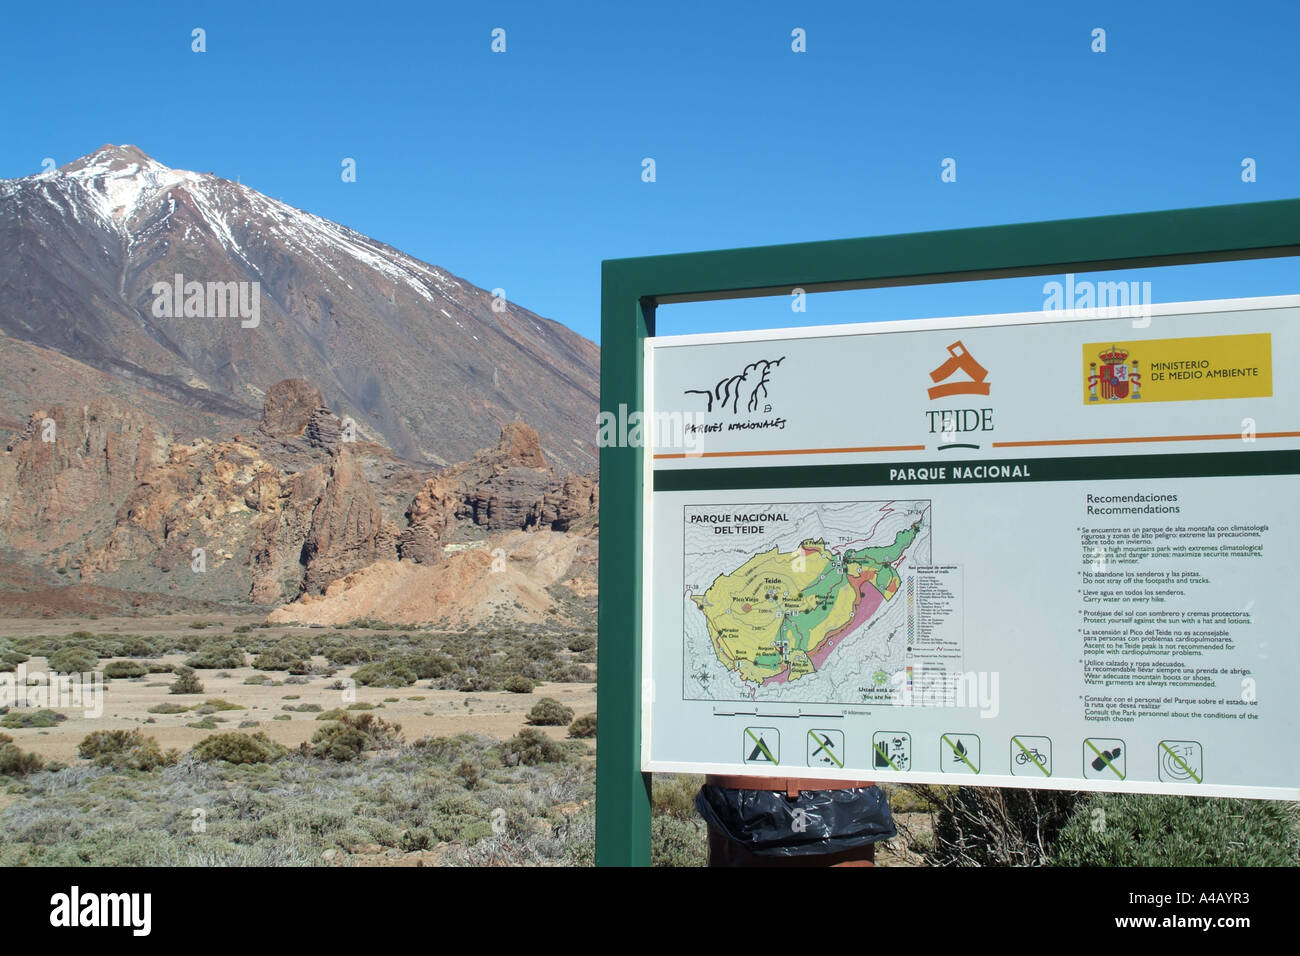 Teide National Park Tenerife Canary Islands Spain map signage and snow capped peak of mount Teide Stock Photo